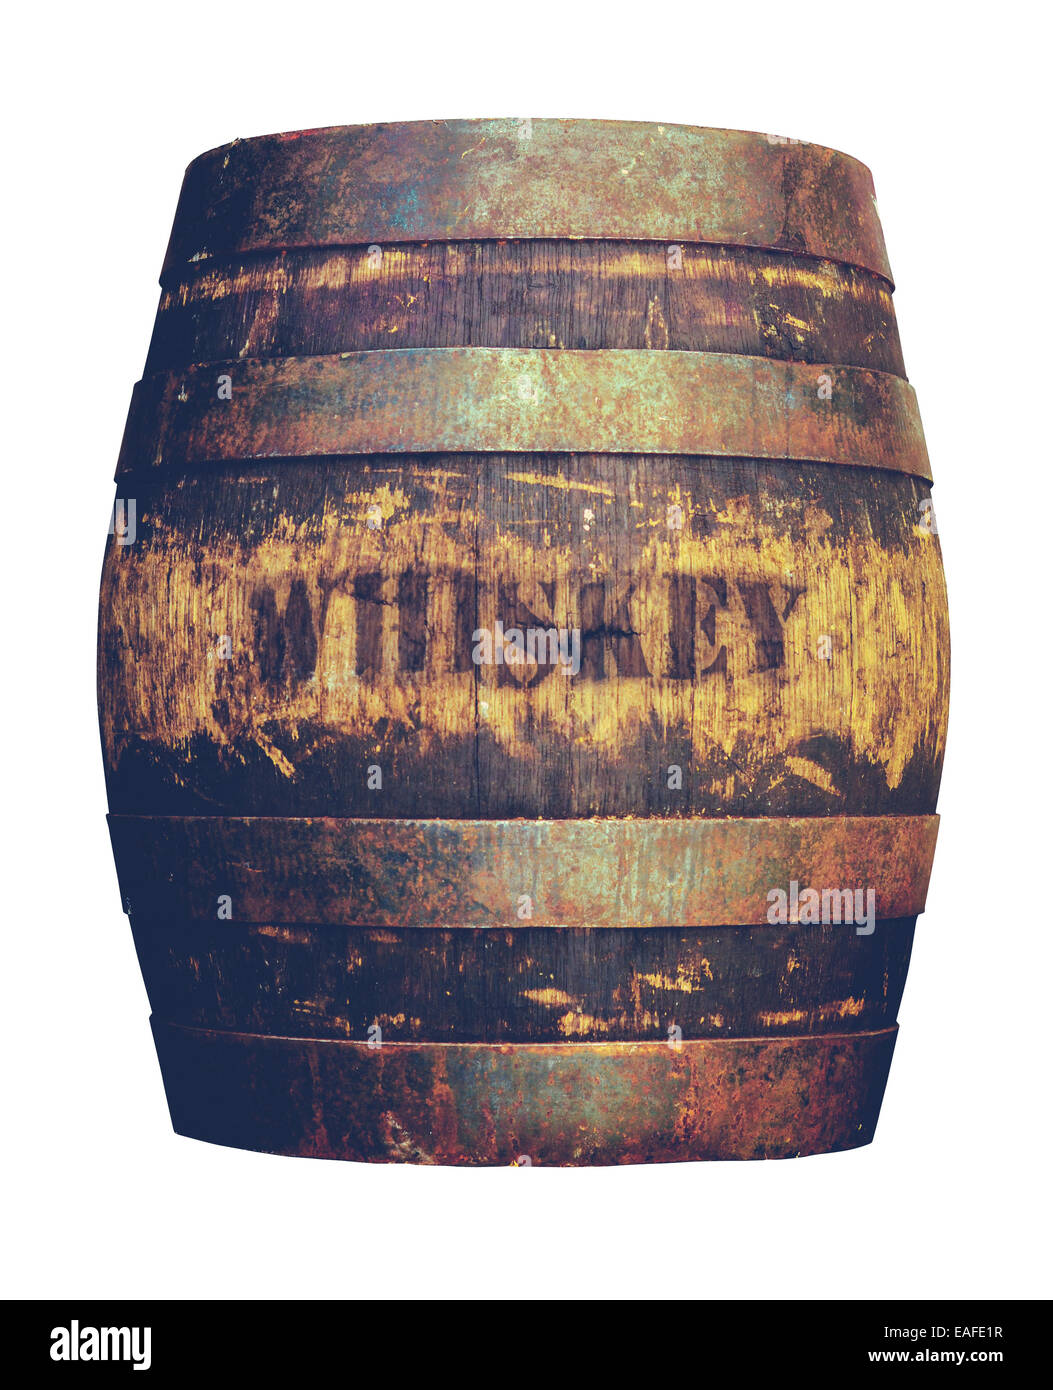 Old Wooden Whiskey Barrel Stock Photo